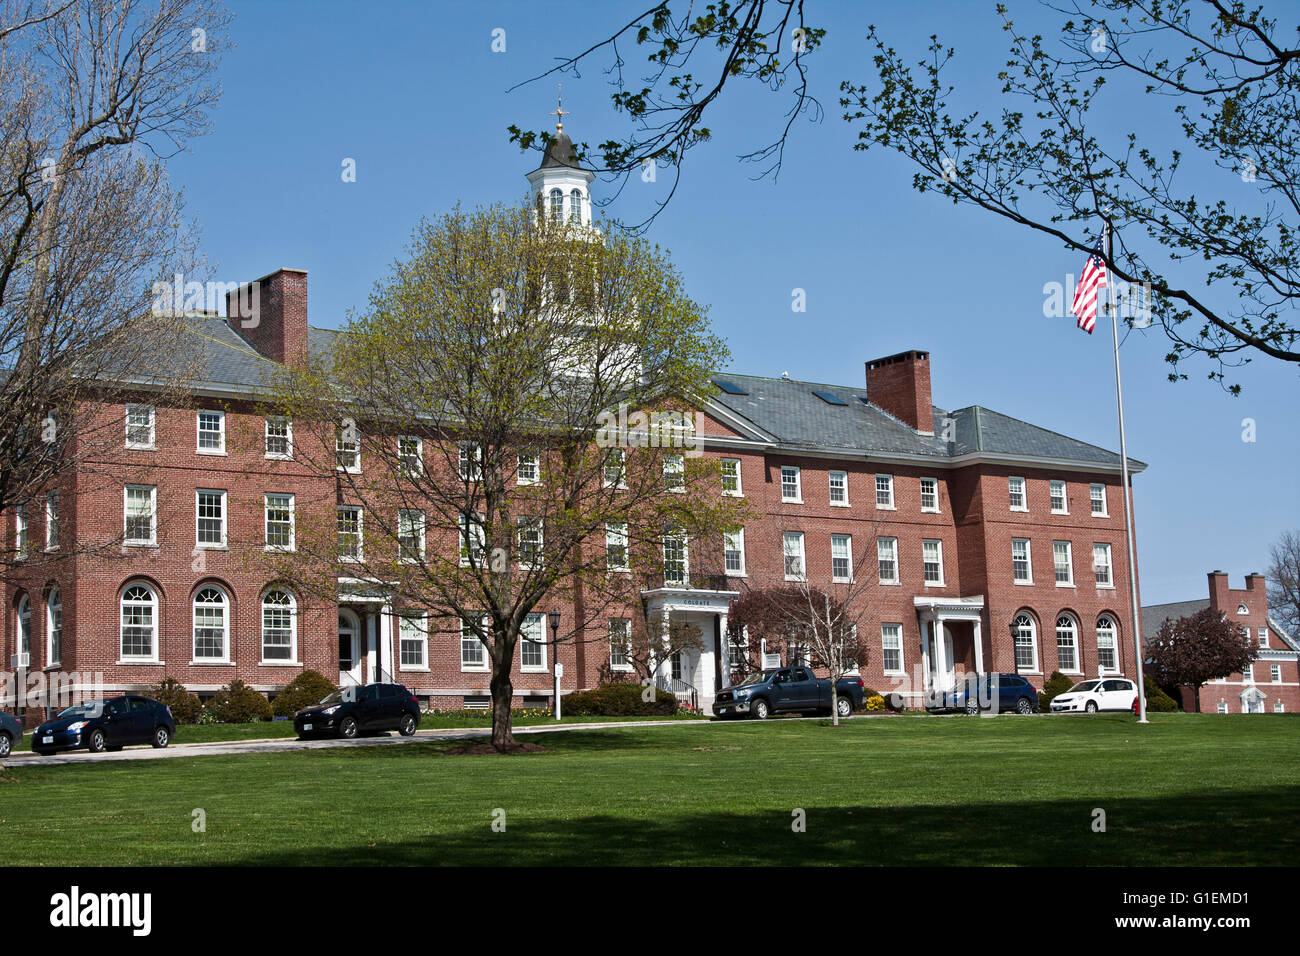 Town Of New London New Hampshire Usa Colgate Hall The Main